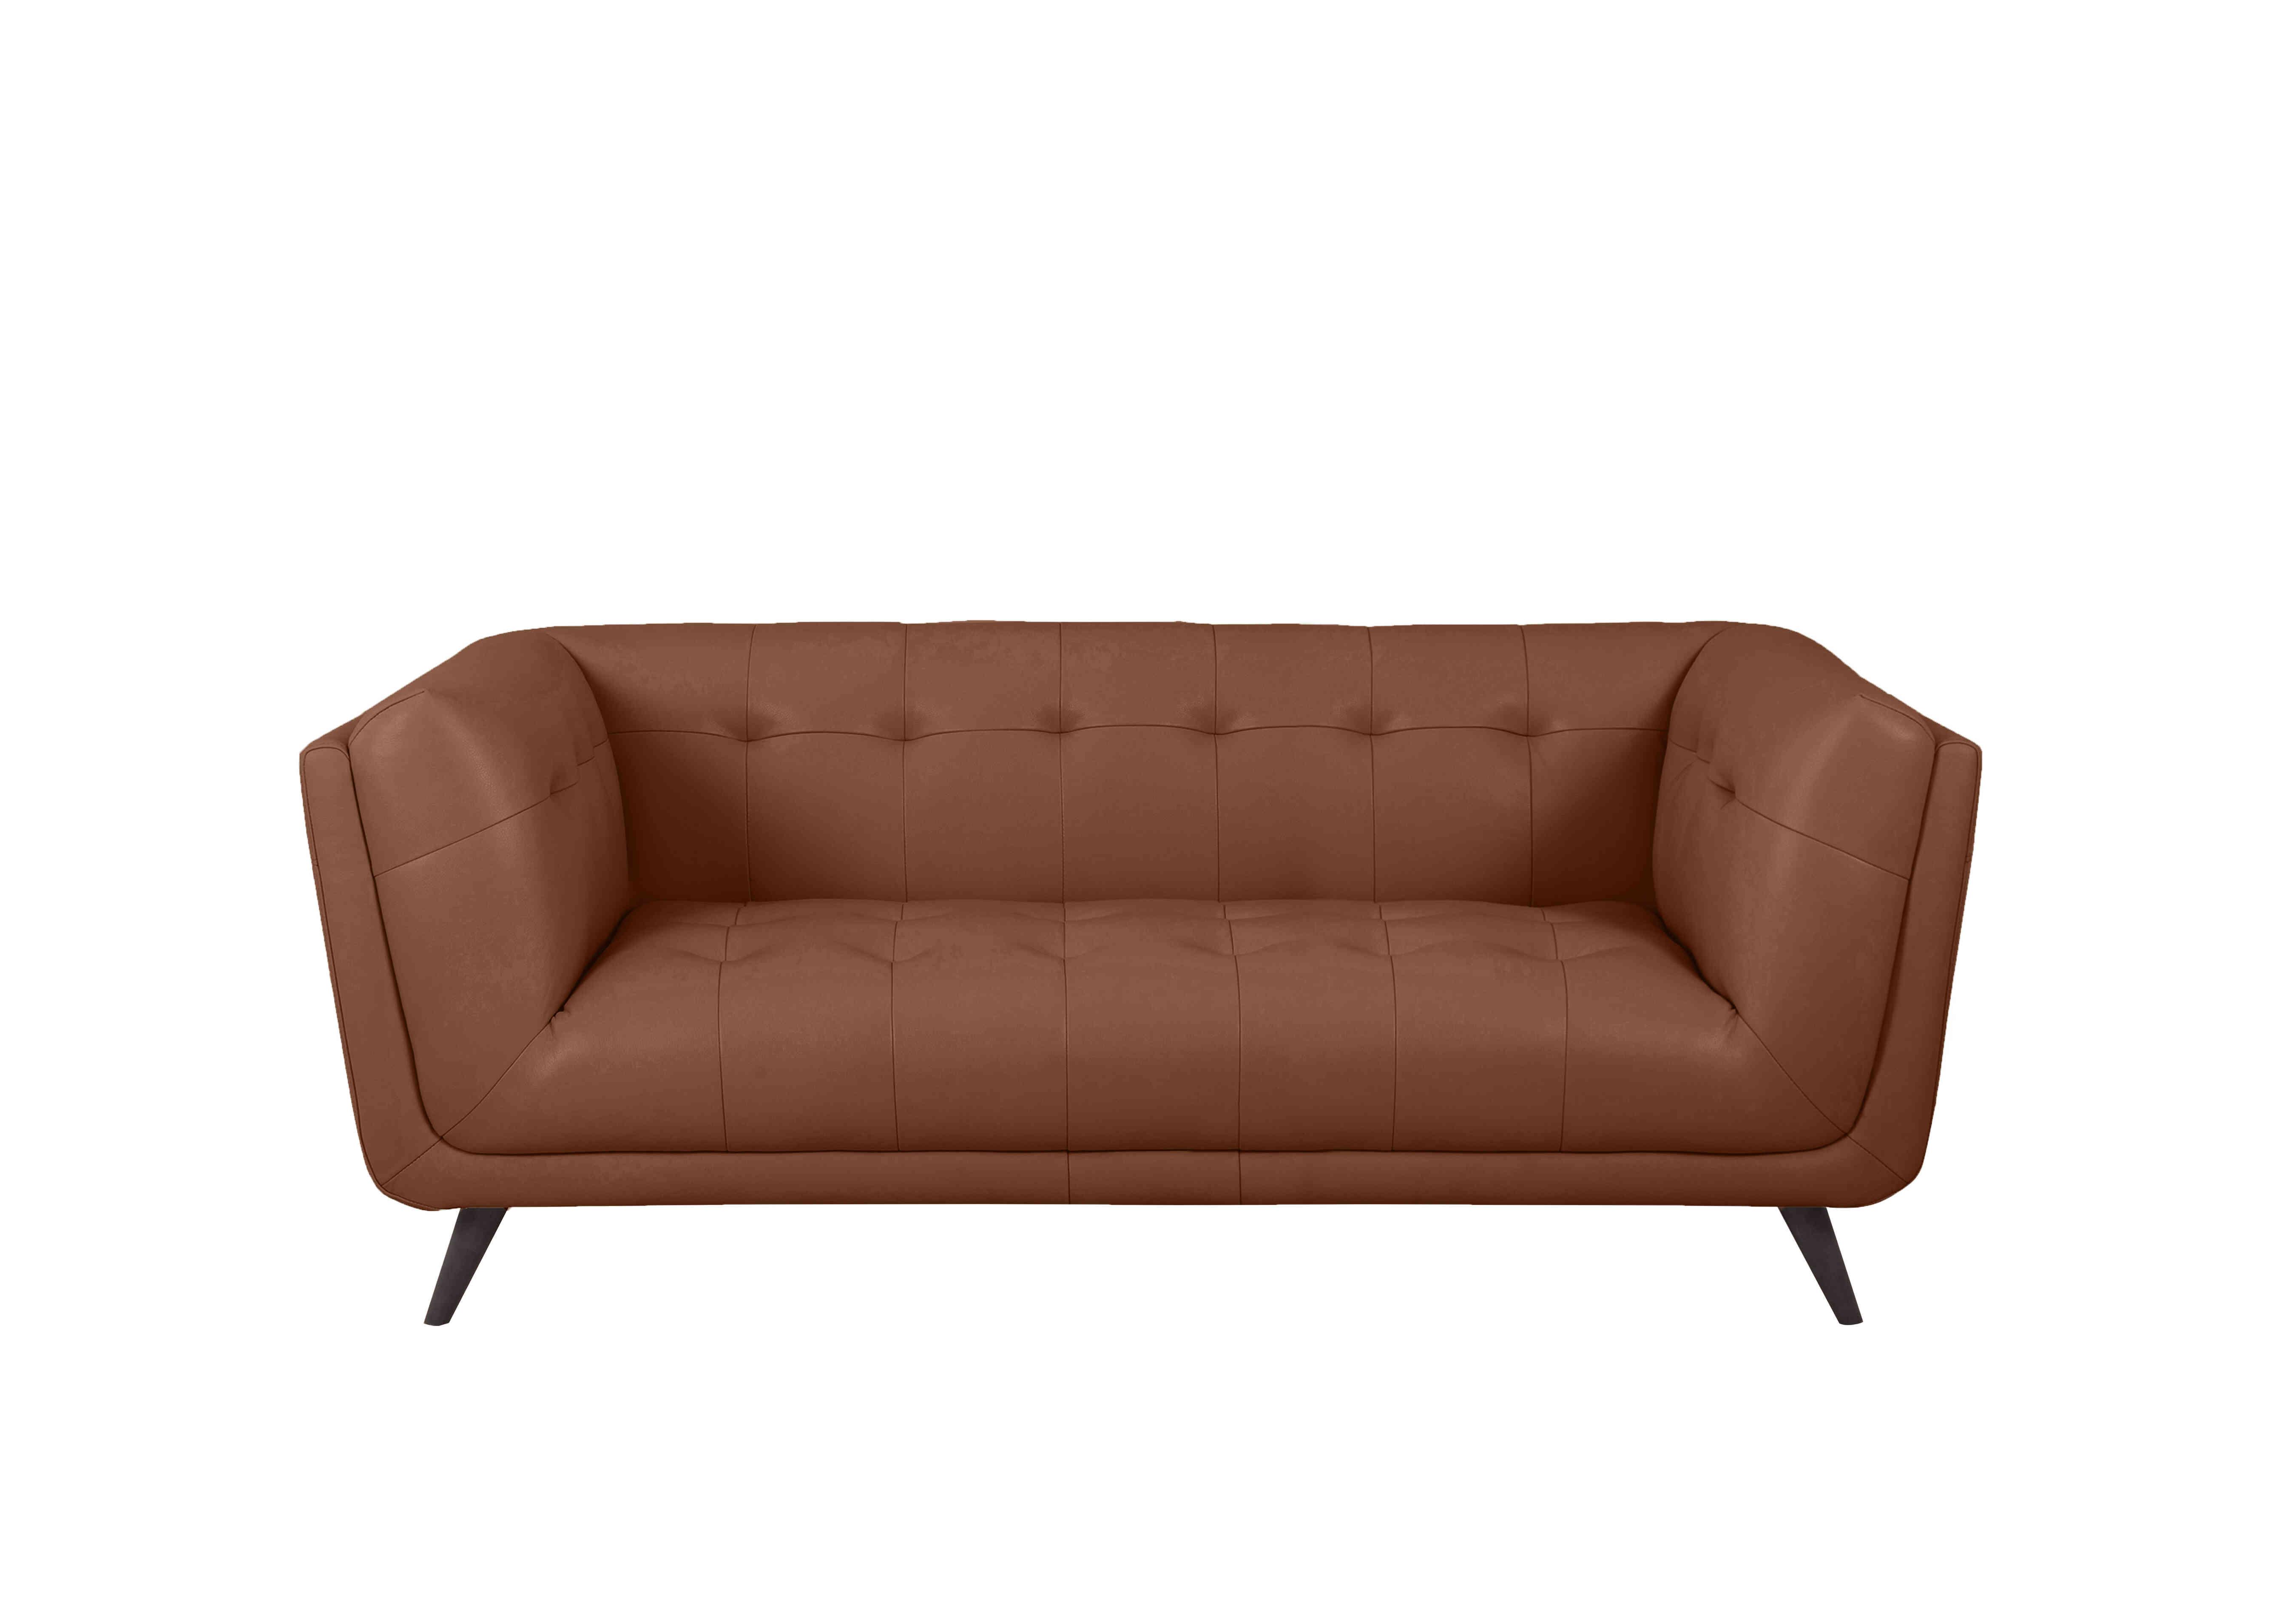 Rene Large 2 Seater Leather Sofa in Florida Butterscotch on Furniture Village